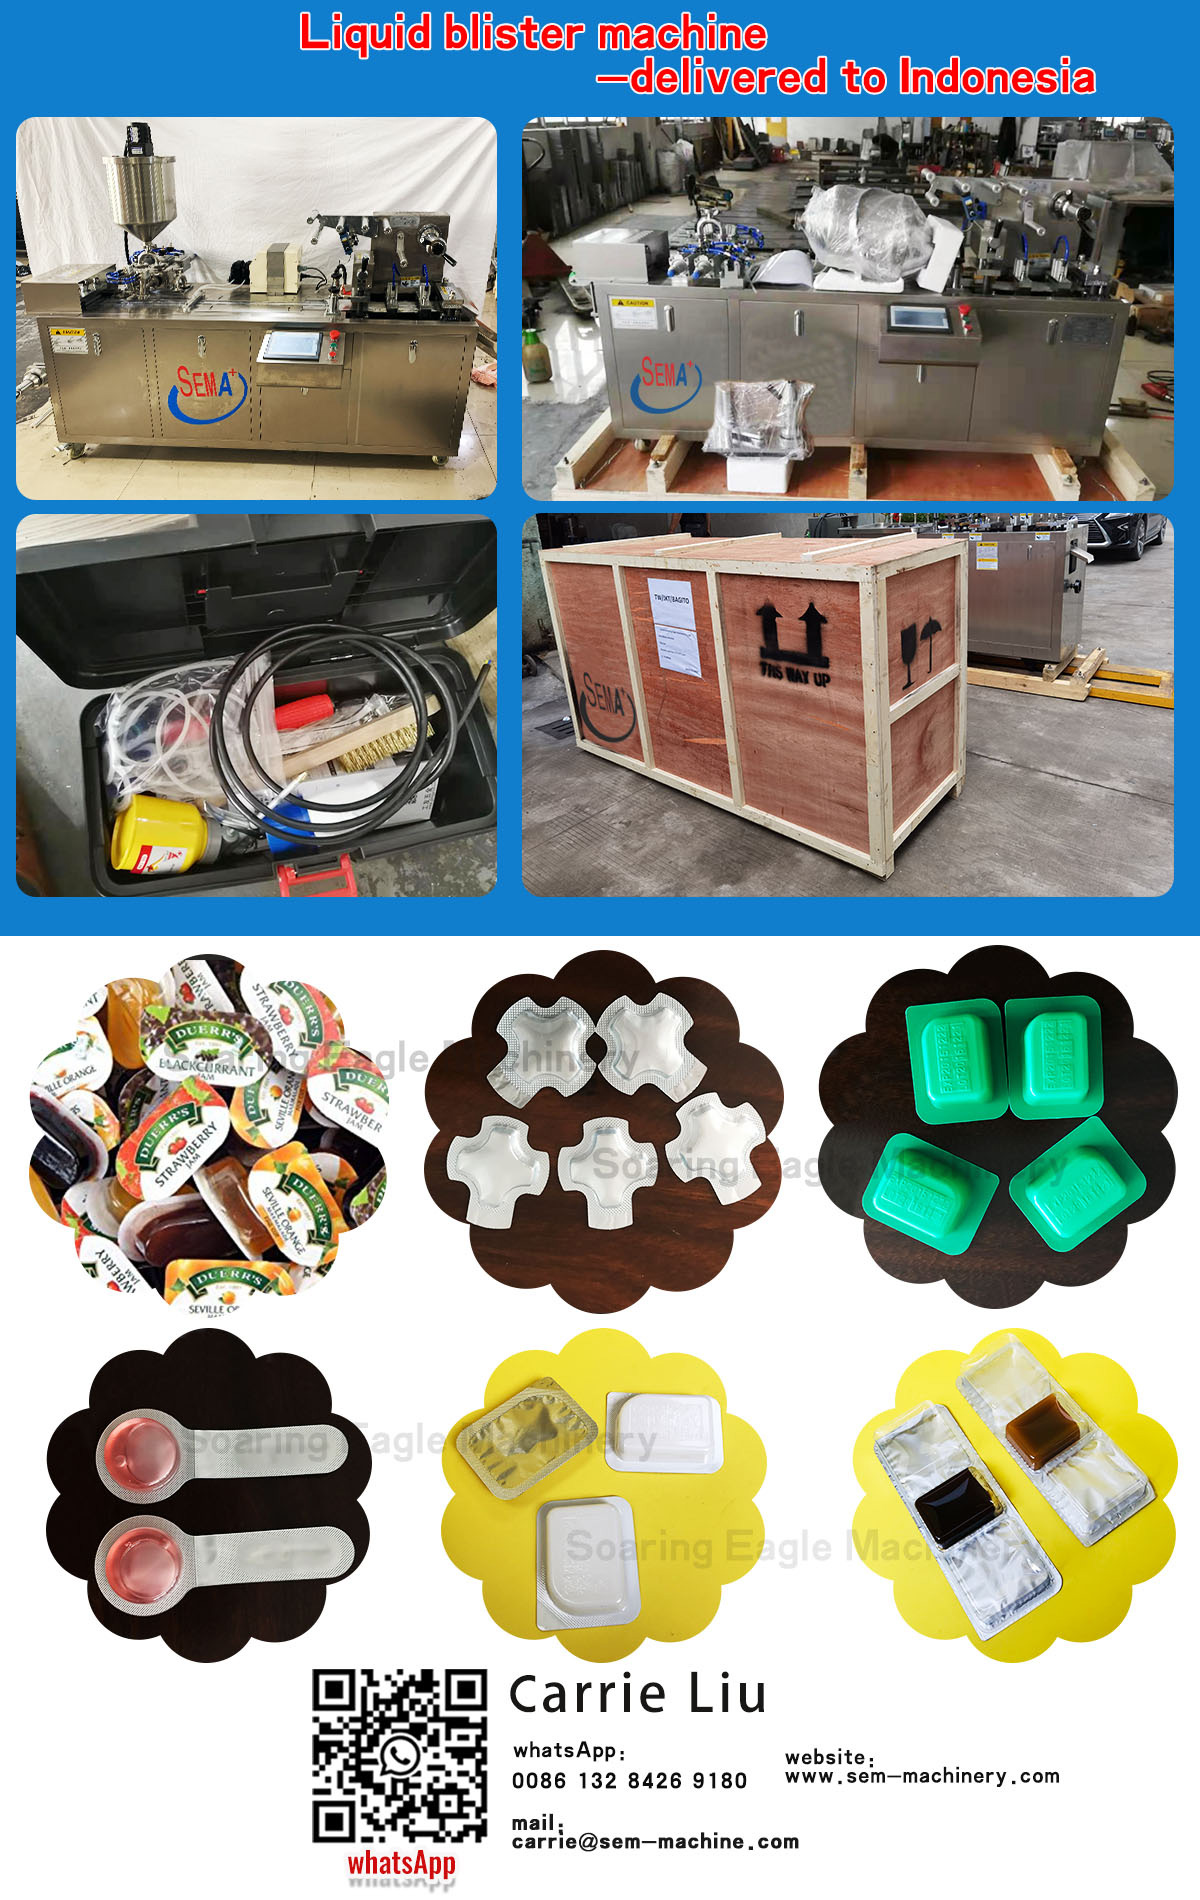 Liquid blister packing machine—delivered to Indonesia